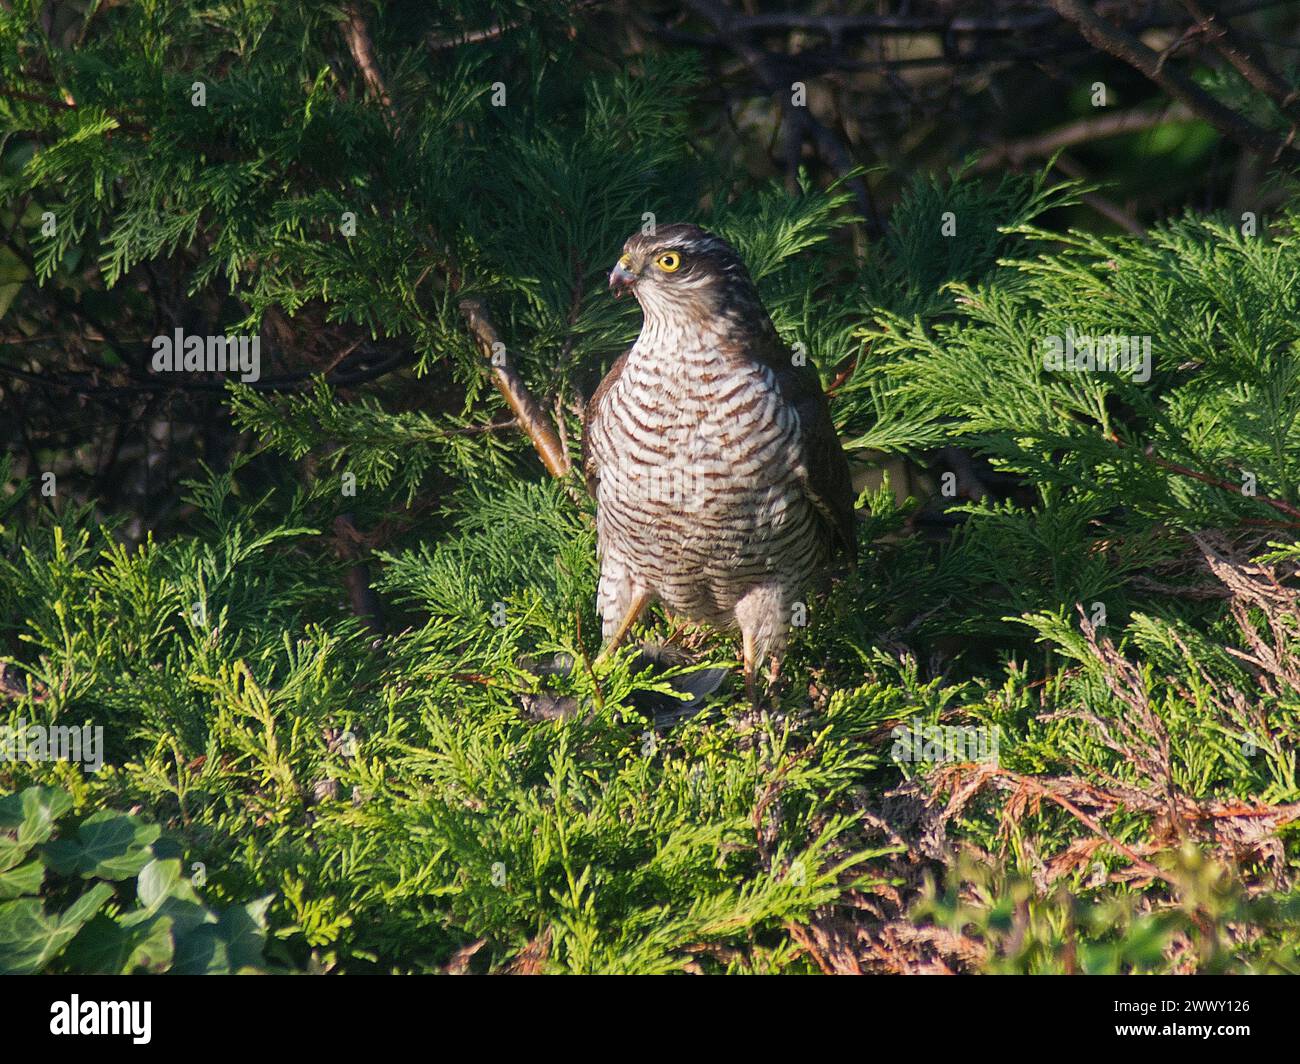 Sparrowhawk in close view holding kill looking to the left, plumage clearly seen and with blood on bill, with background of conifer foliage Stock Photo